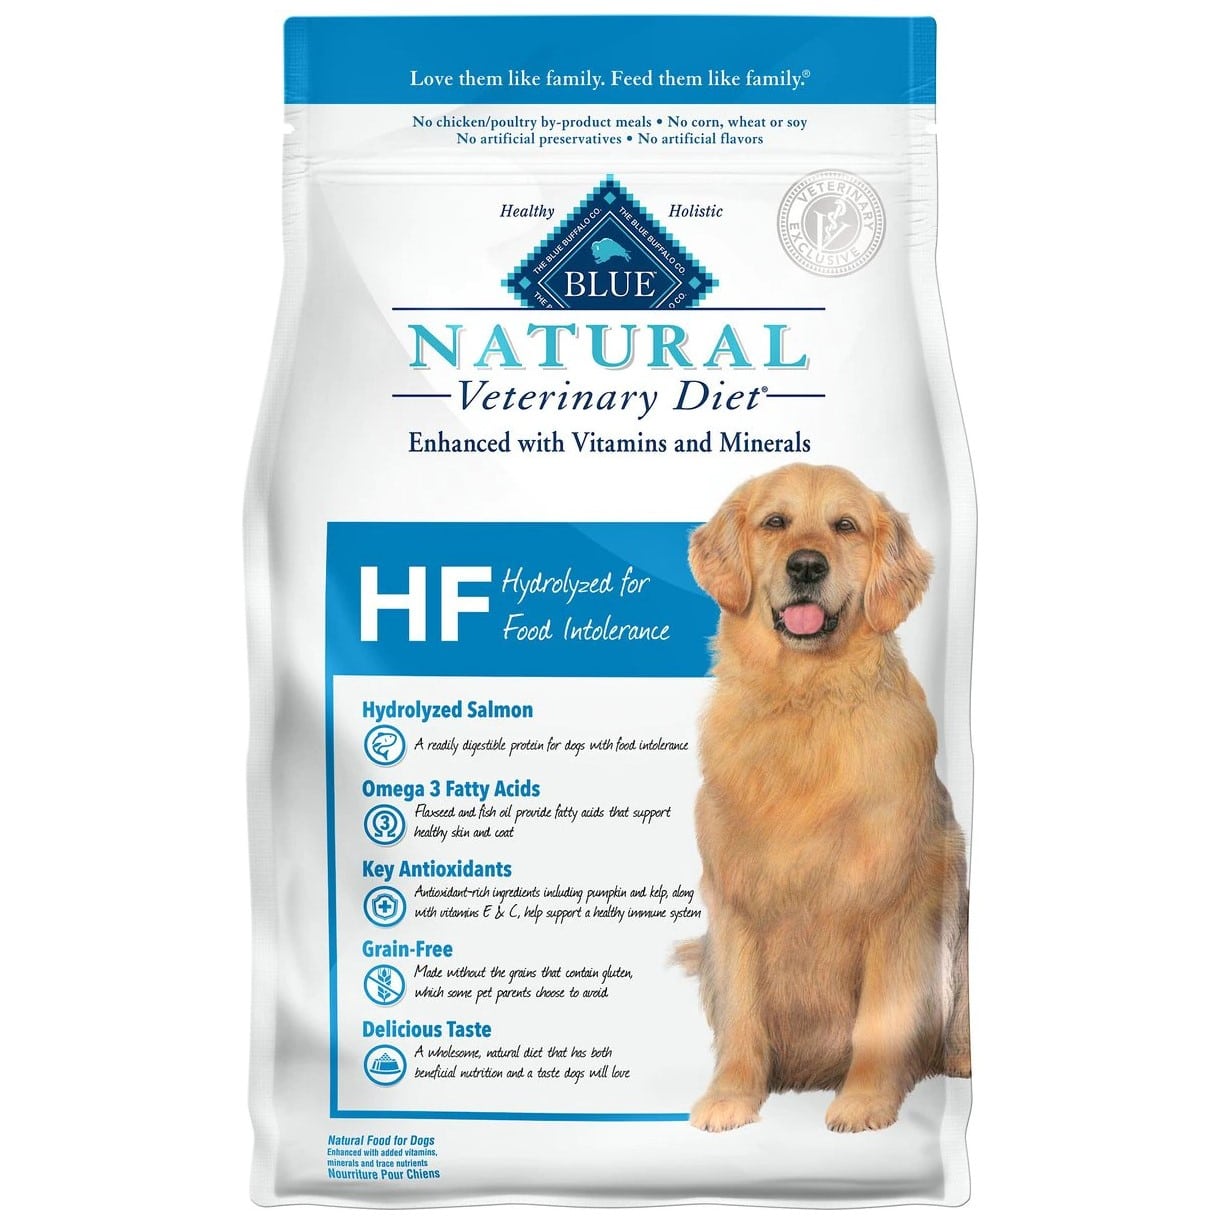 Blue Buffalo Natural Veterinary Diet HF Hydrolyzed for Food Intolerance Grain-Free Dry Dog Food